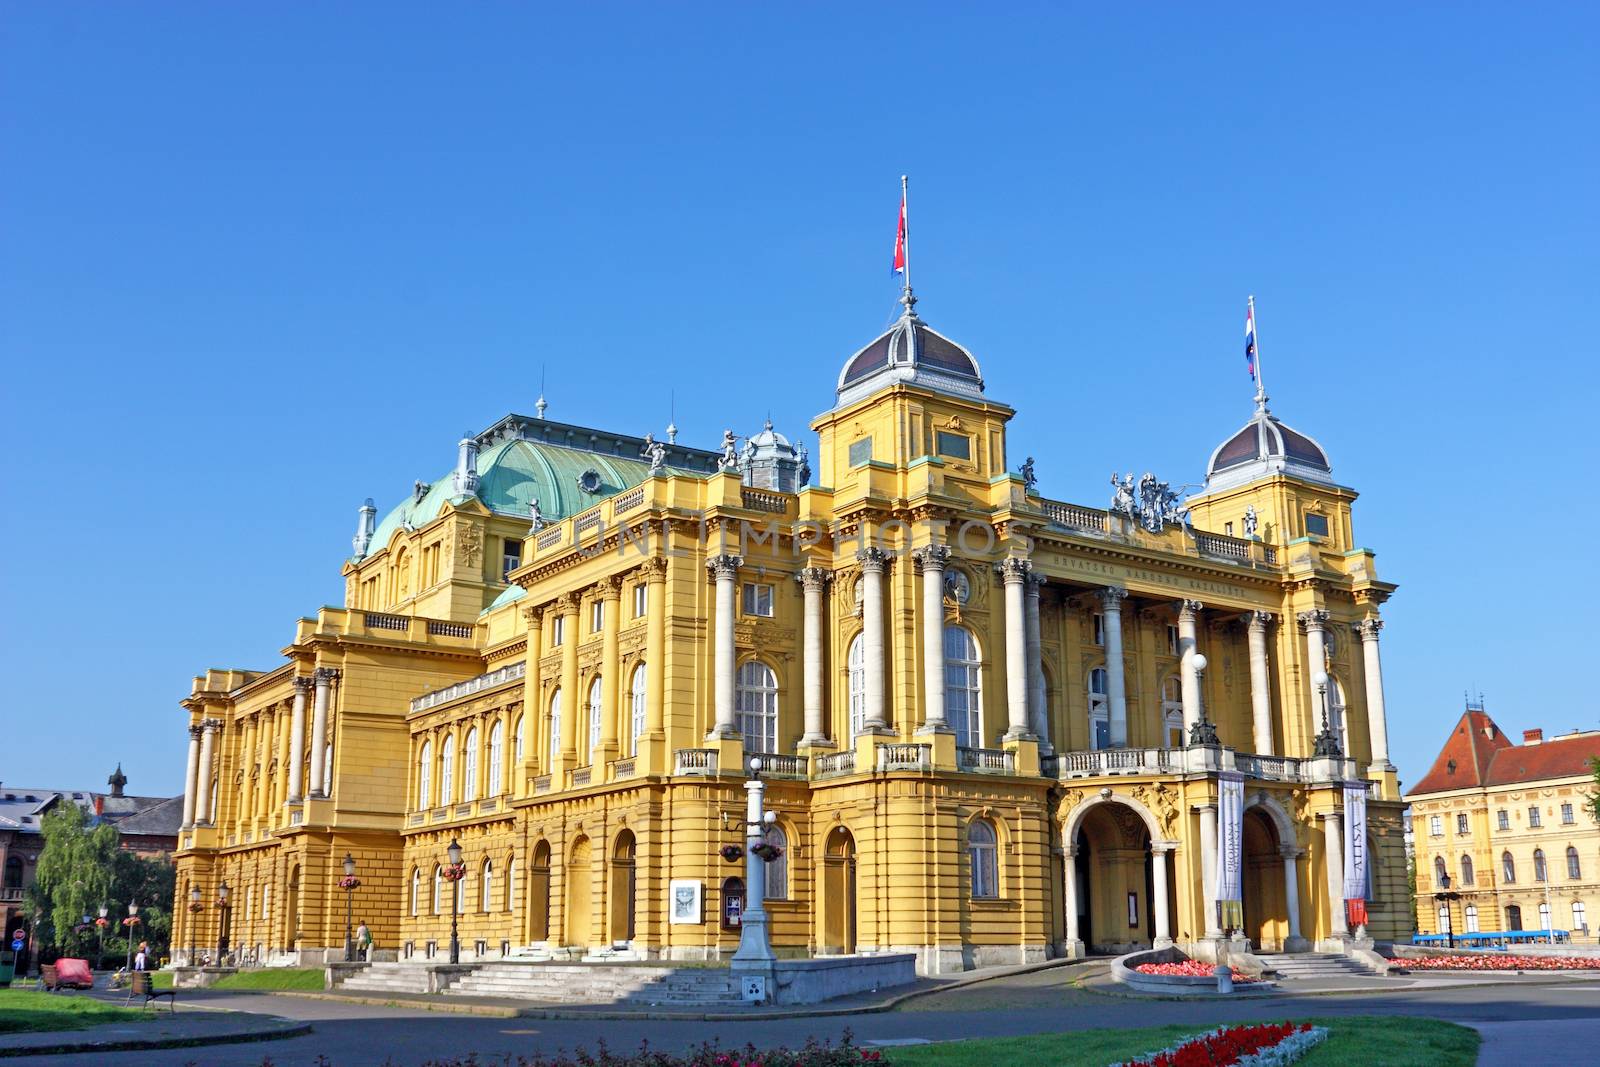 Croatian national theater in Zagreb by day